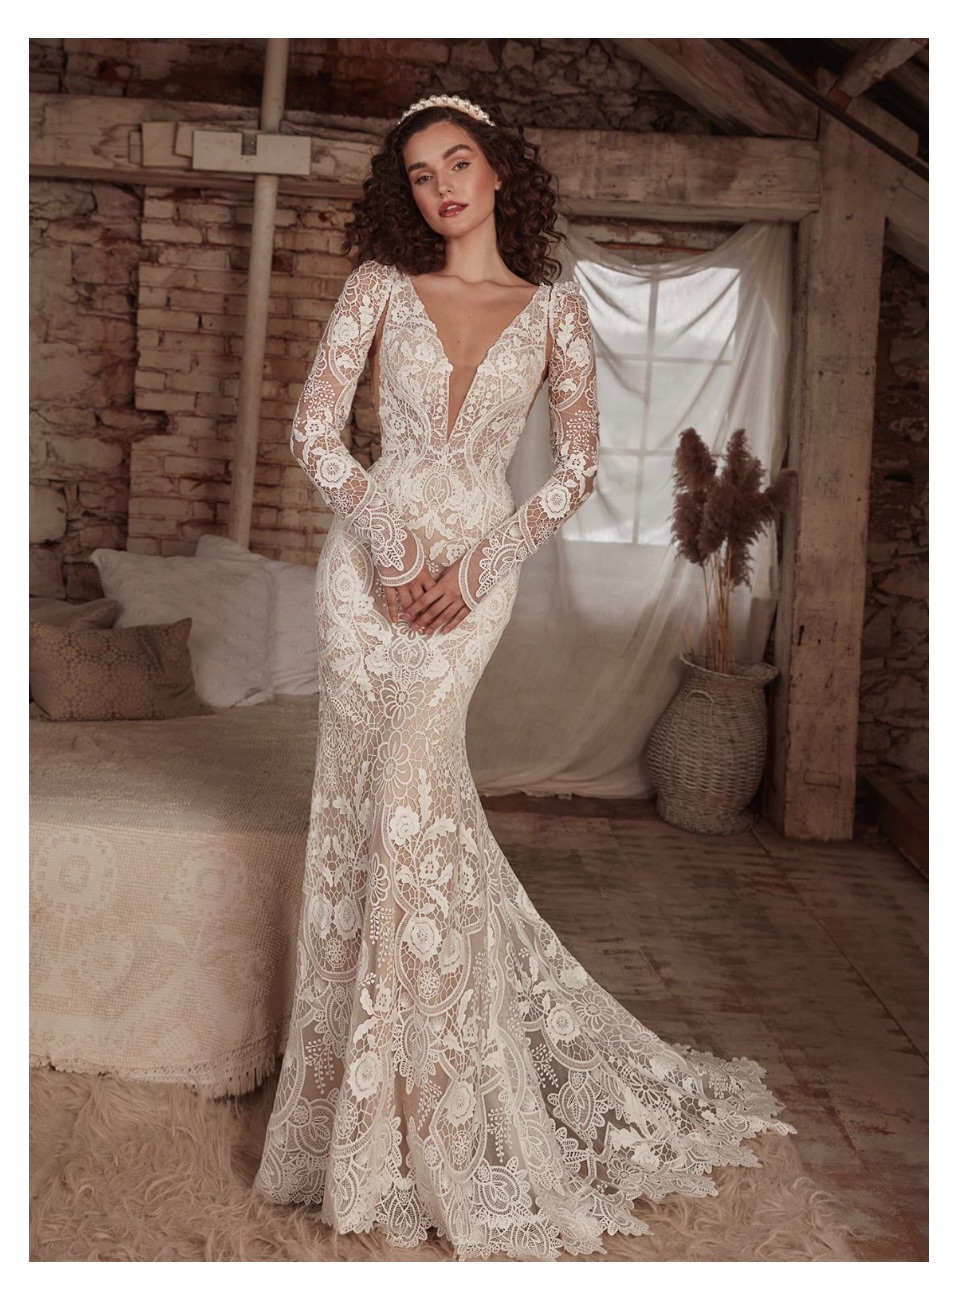 Keep up to date with Holmes and Co Bridal Couture by joining their Facebook page